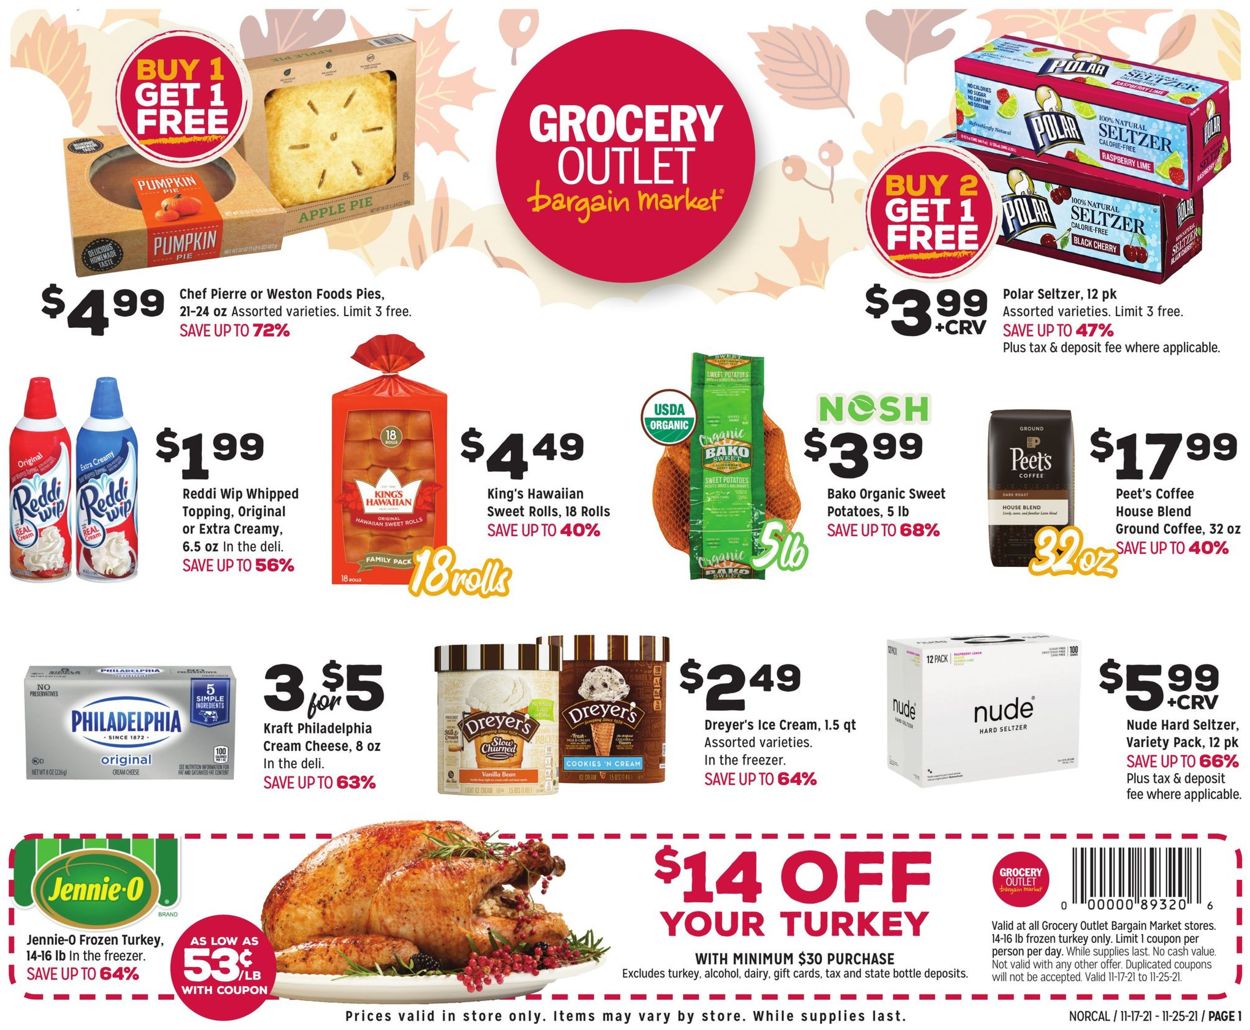 Grocery Outlet THANKSGIVING 2021 Weekly Ad Circular - valid 11/17-11/25/2021